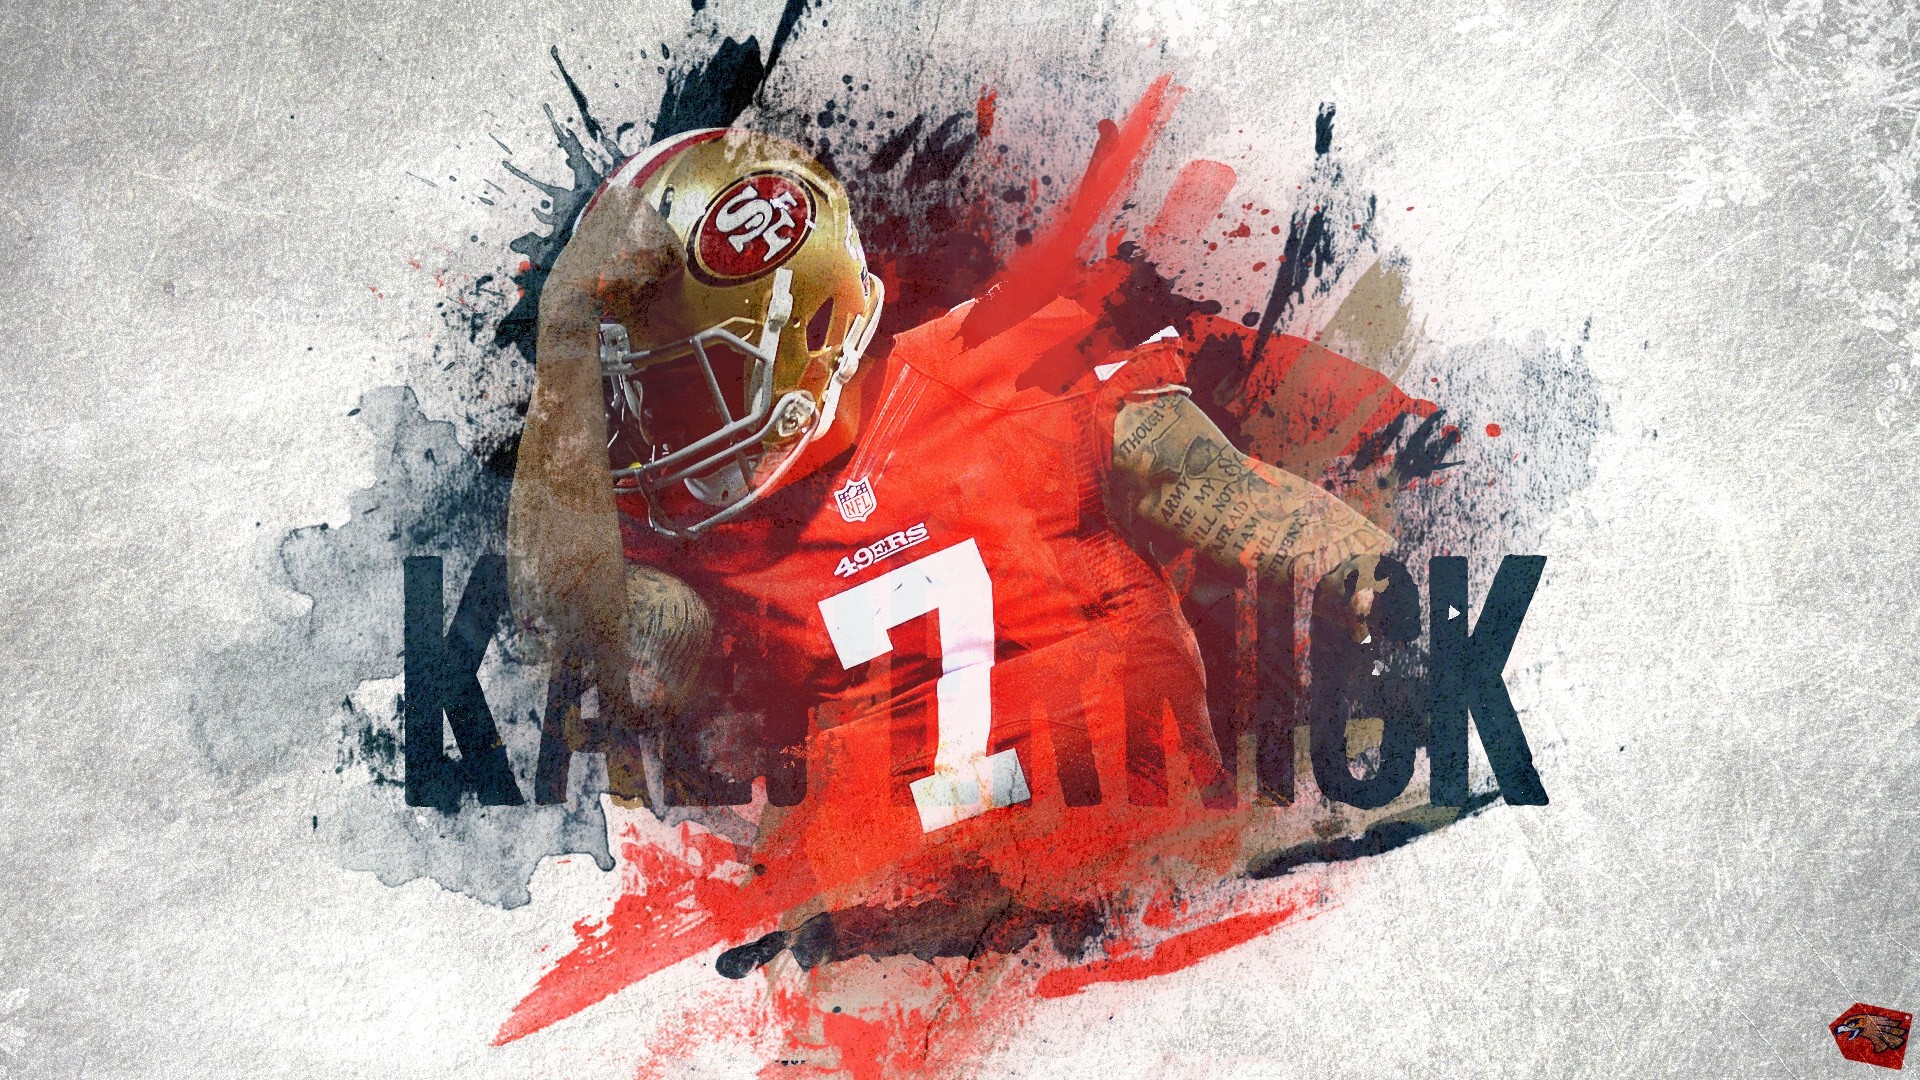 1920x1080 49ers background hd wednesday amazing cool colourful background photos  download free apple picture 